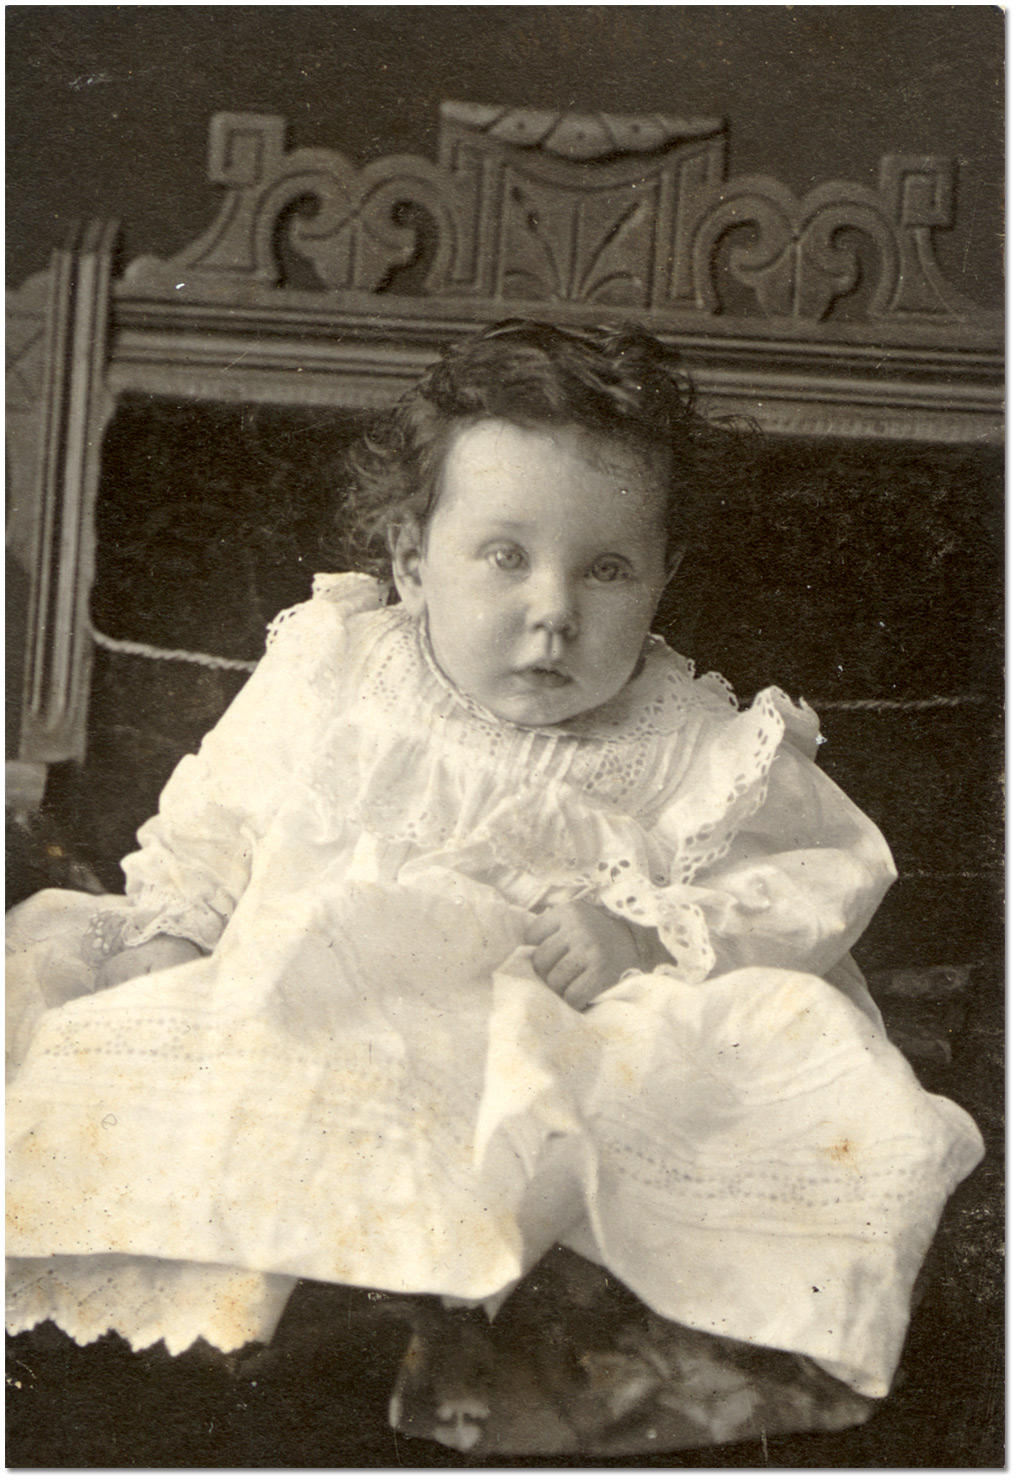 Portrait of a baby, [between 1900 and 1920]